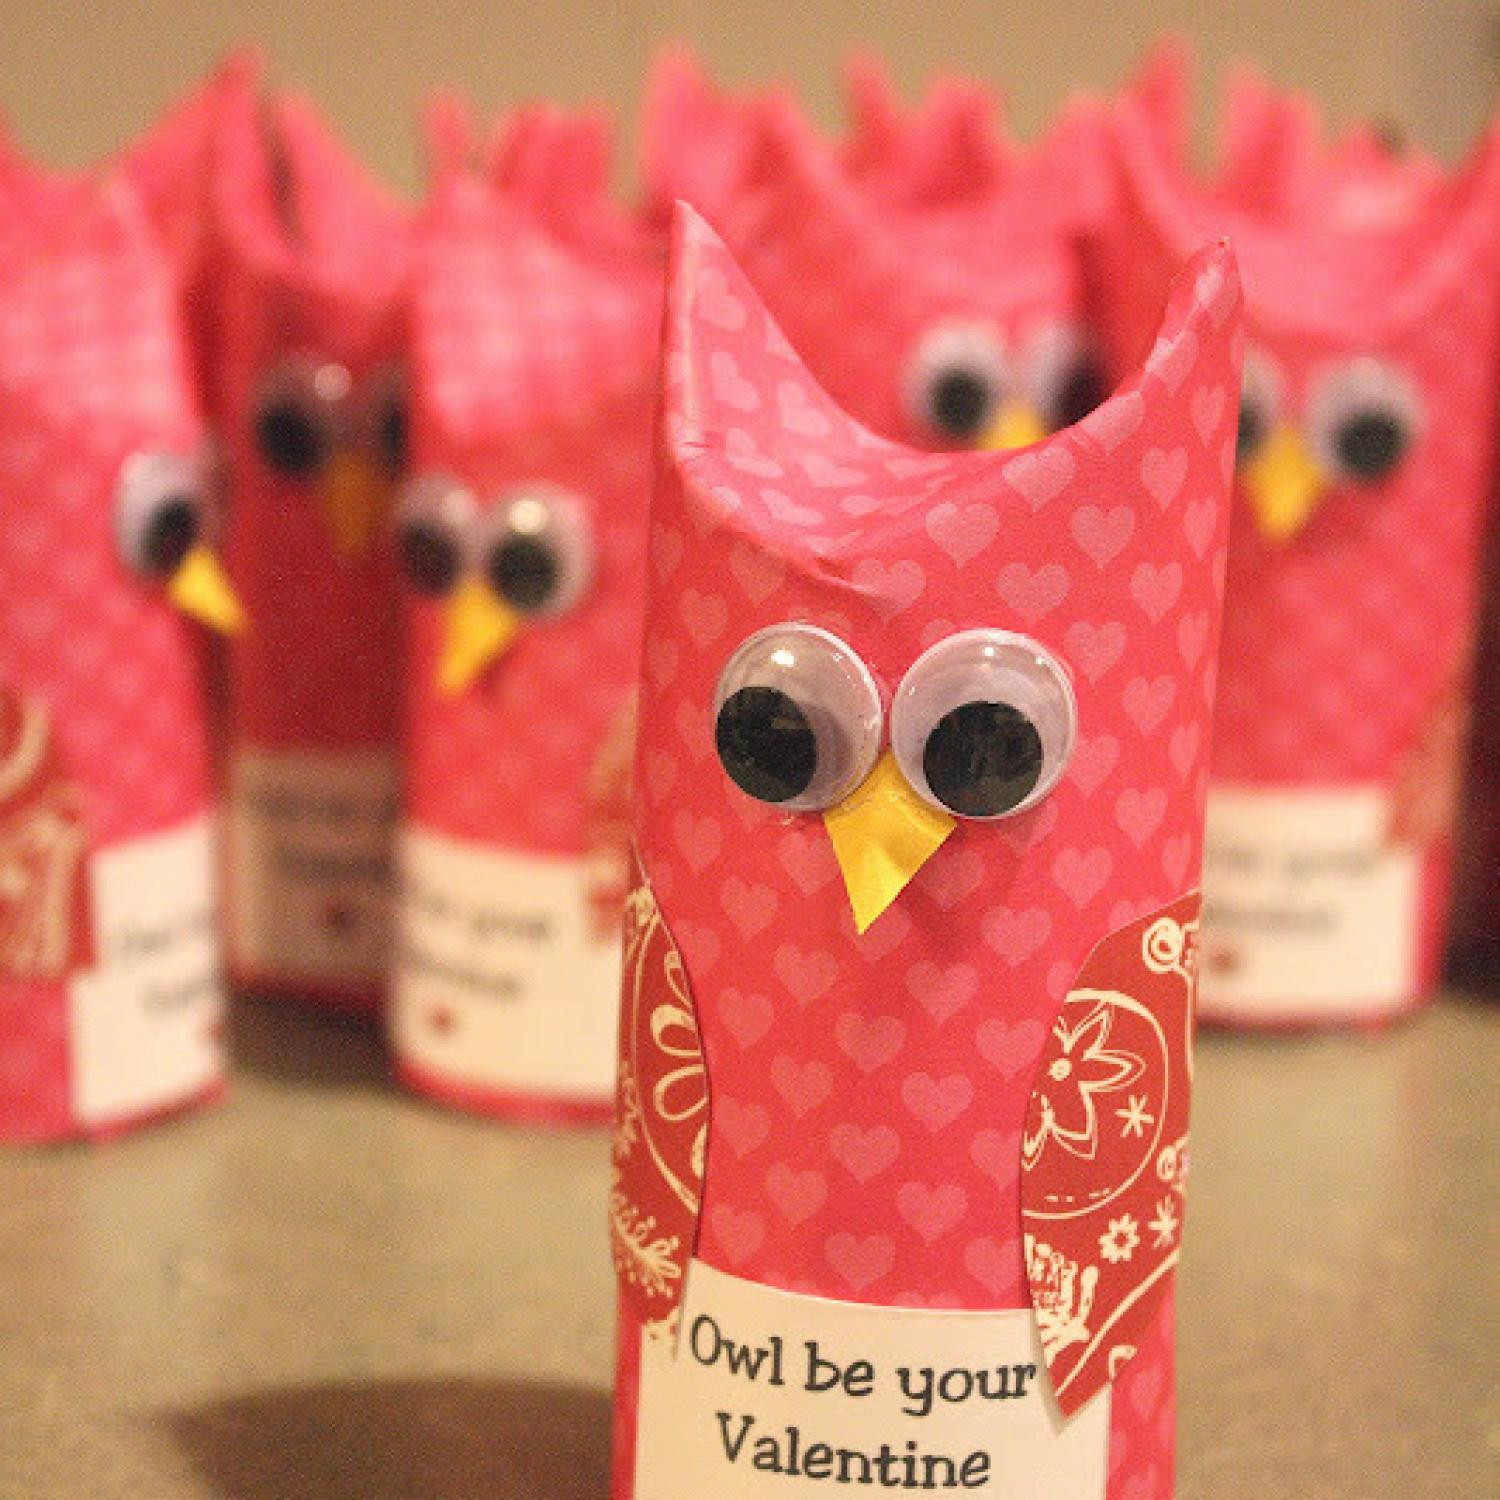 Home Made Gift Ideas For Valentines Day
 Our Favorite Homemade Valentines for Kids